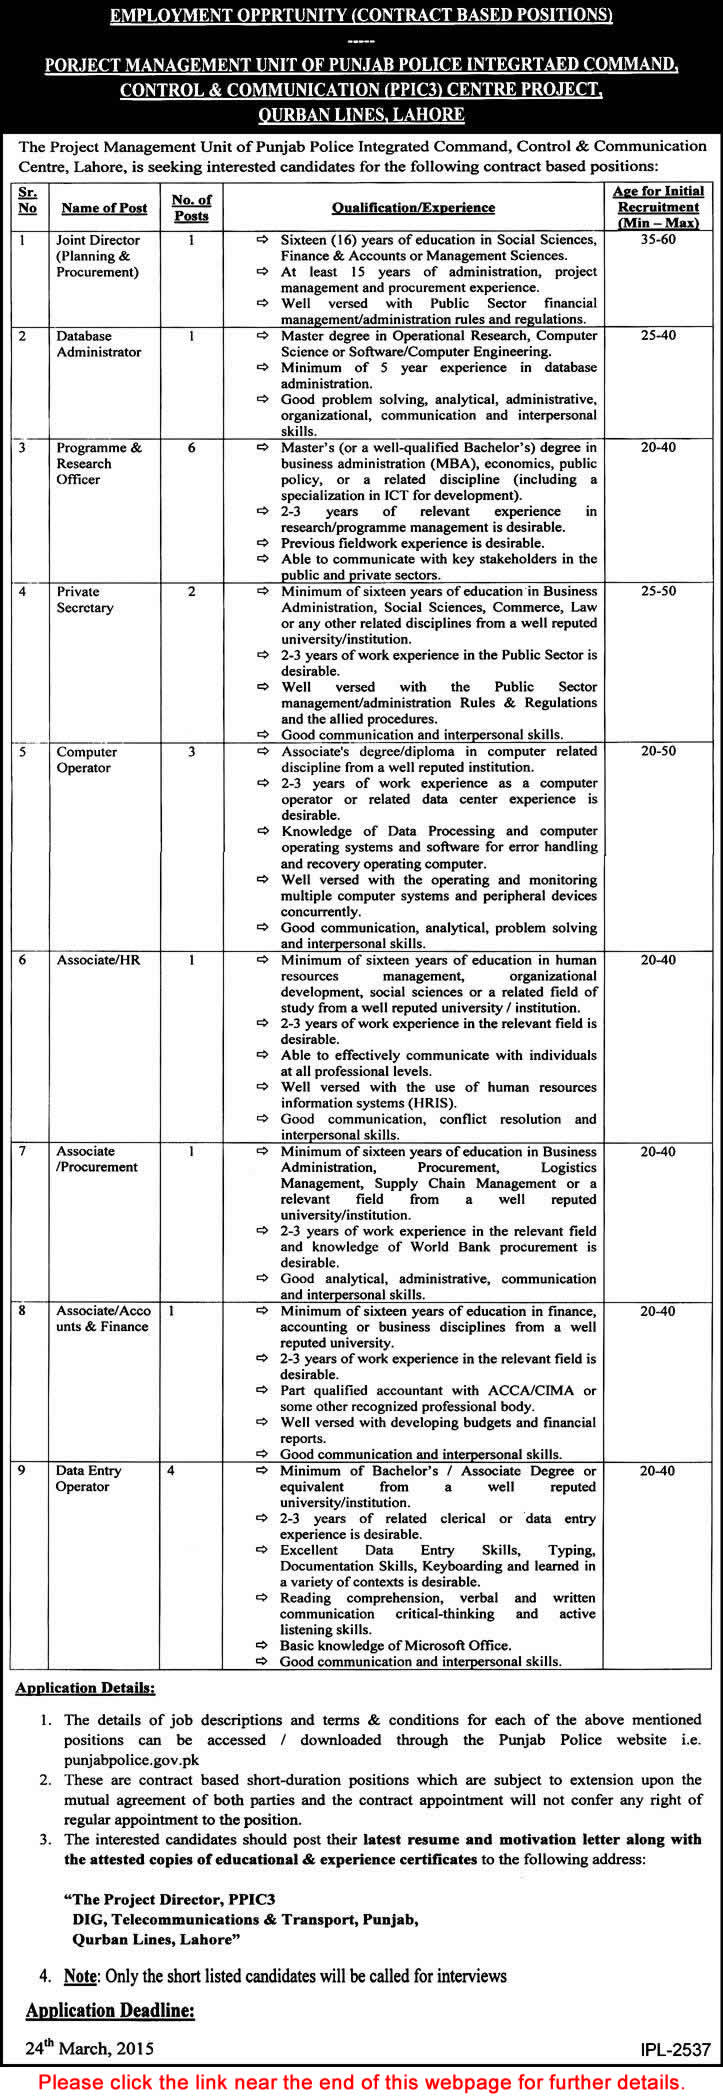 Punjab Police Jobs in Lahore 2015 March PMU PPIC3 Centre Project Latest Advertisement